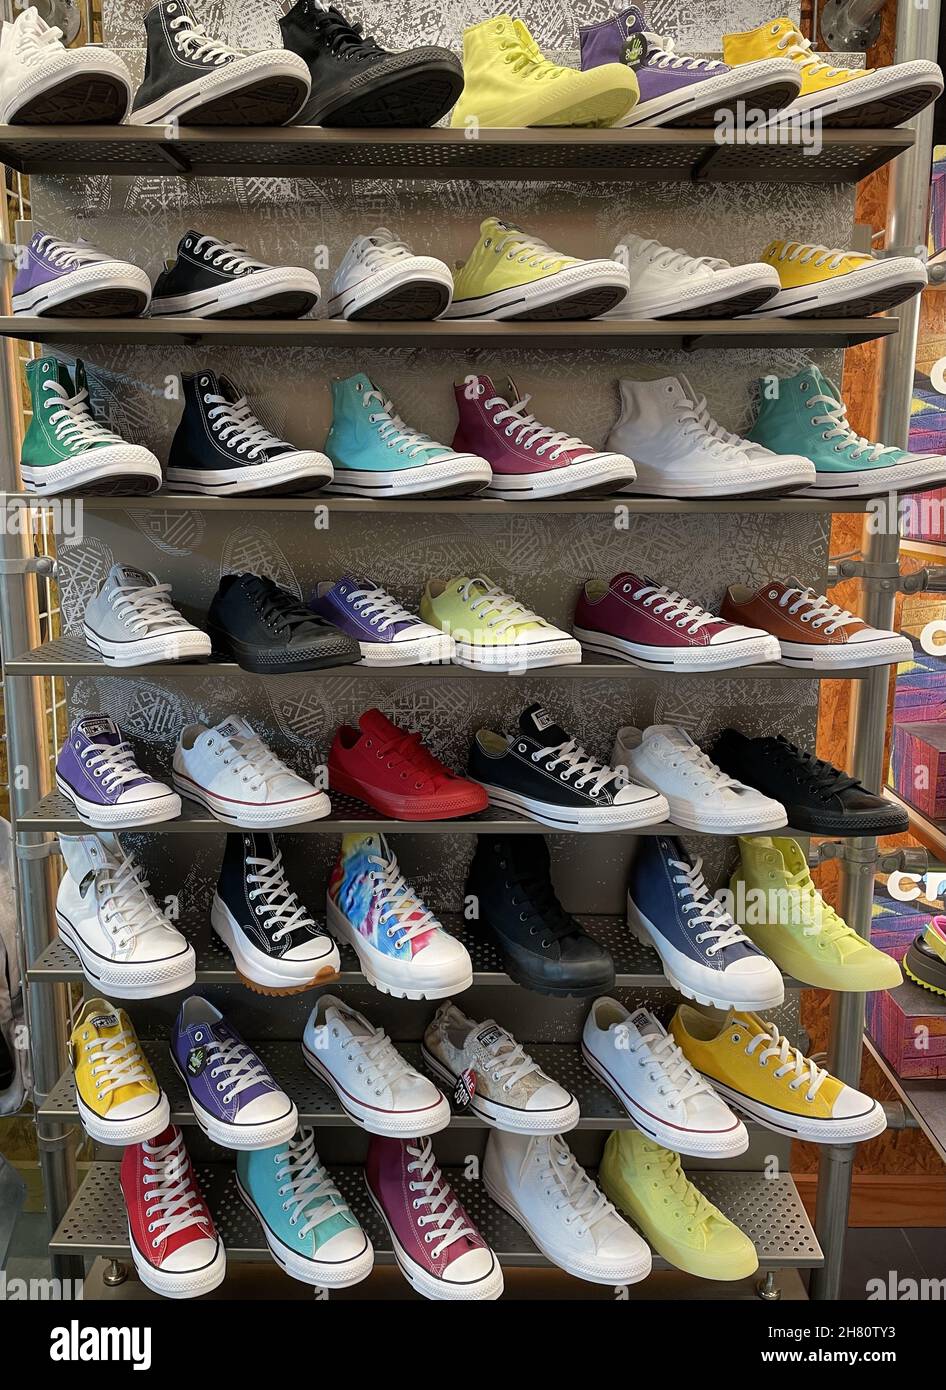 FRESN, UNITED STATES - Oct 27, 2021: A vertical shot of a store wall shelf  full of Converse All-Star Canvas Shoes in different fun colors Stock Photo  - Alamy